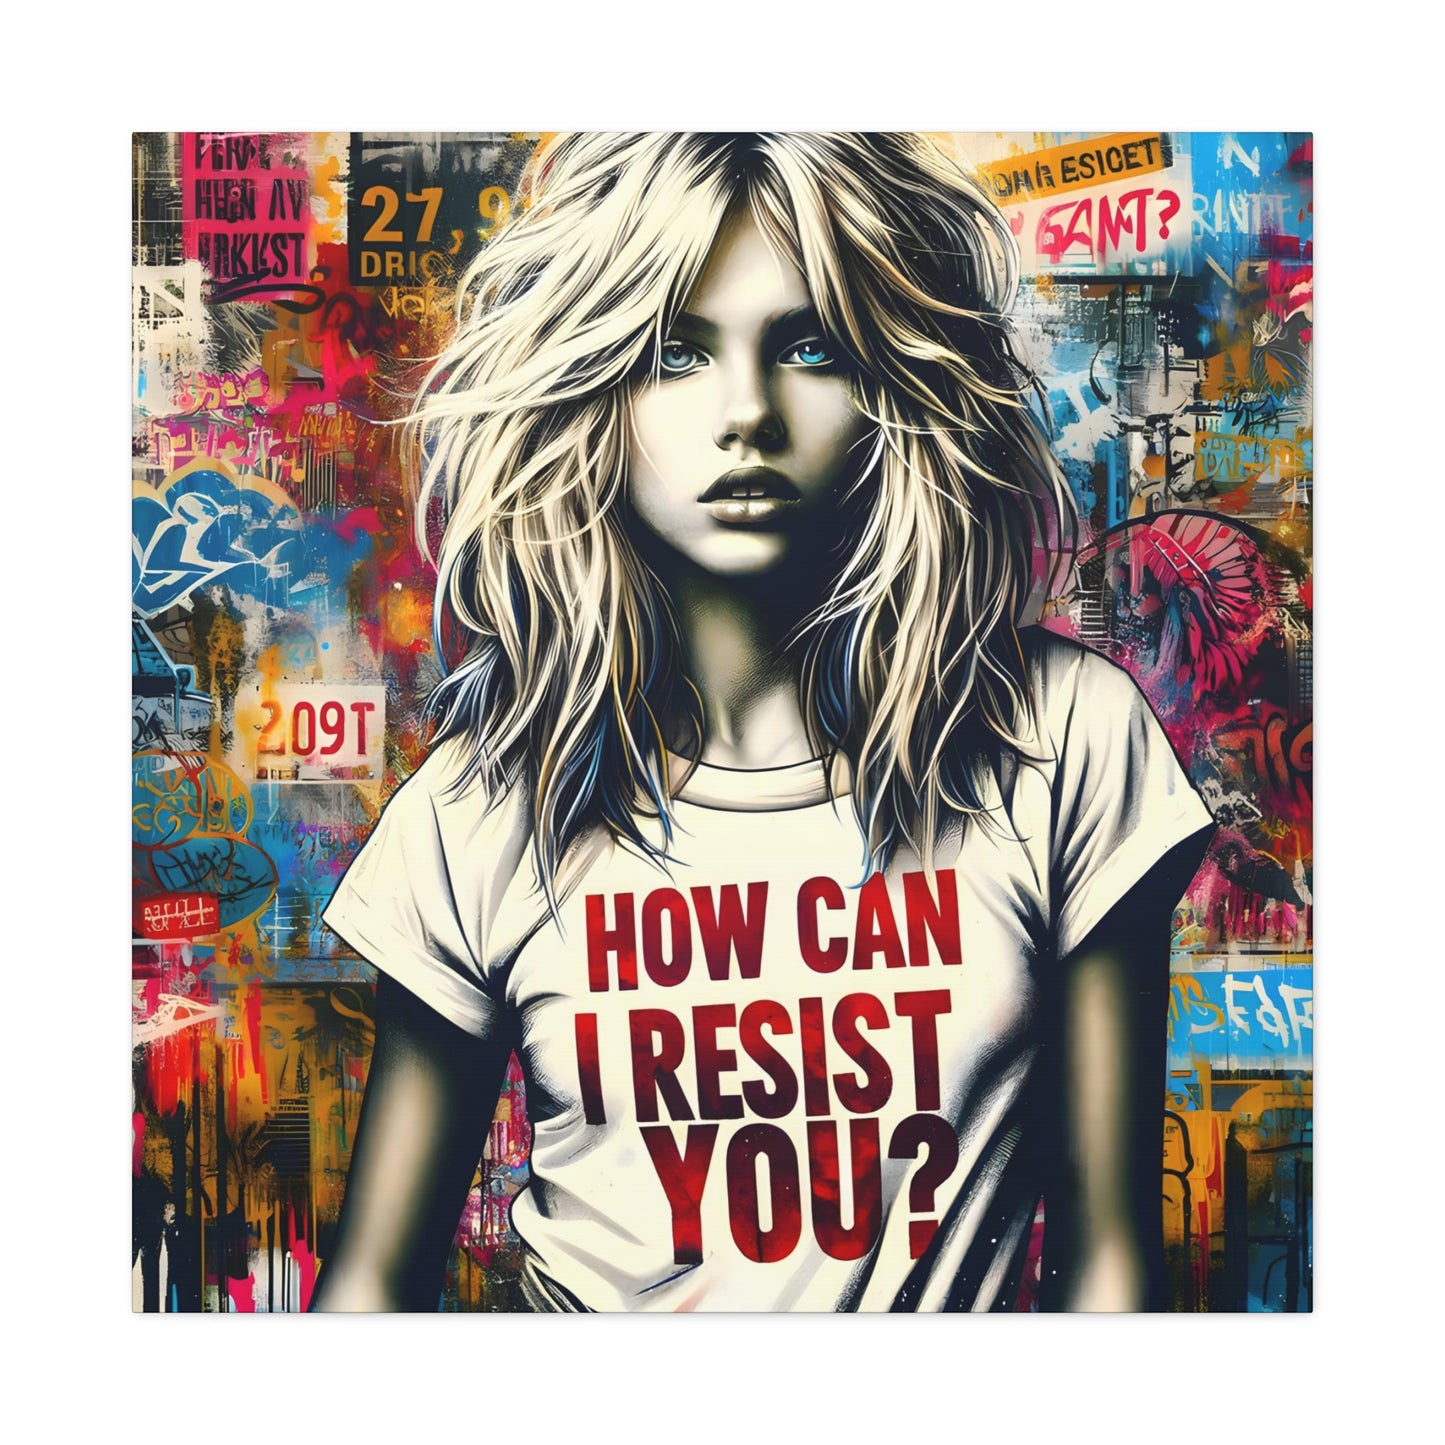 square 2 AI-generated art, 'Resist You? – An ABBA Echo,' with a modern Aphrodite in urban setting, her shirt reading 'HOW CAN I RESIST YOU?' amidst colorful graffiti, echoing ABBA's themes.